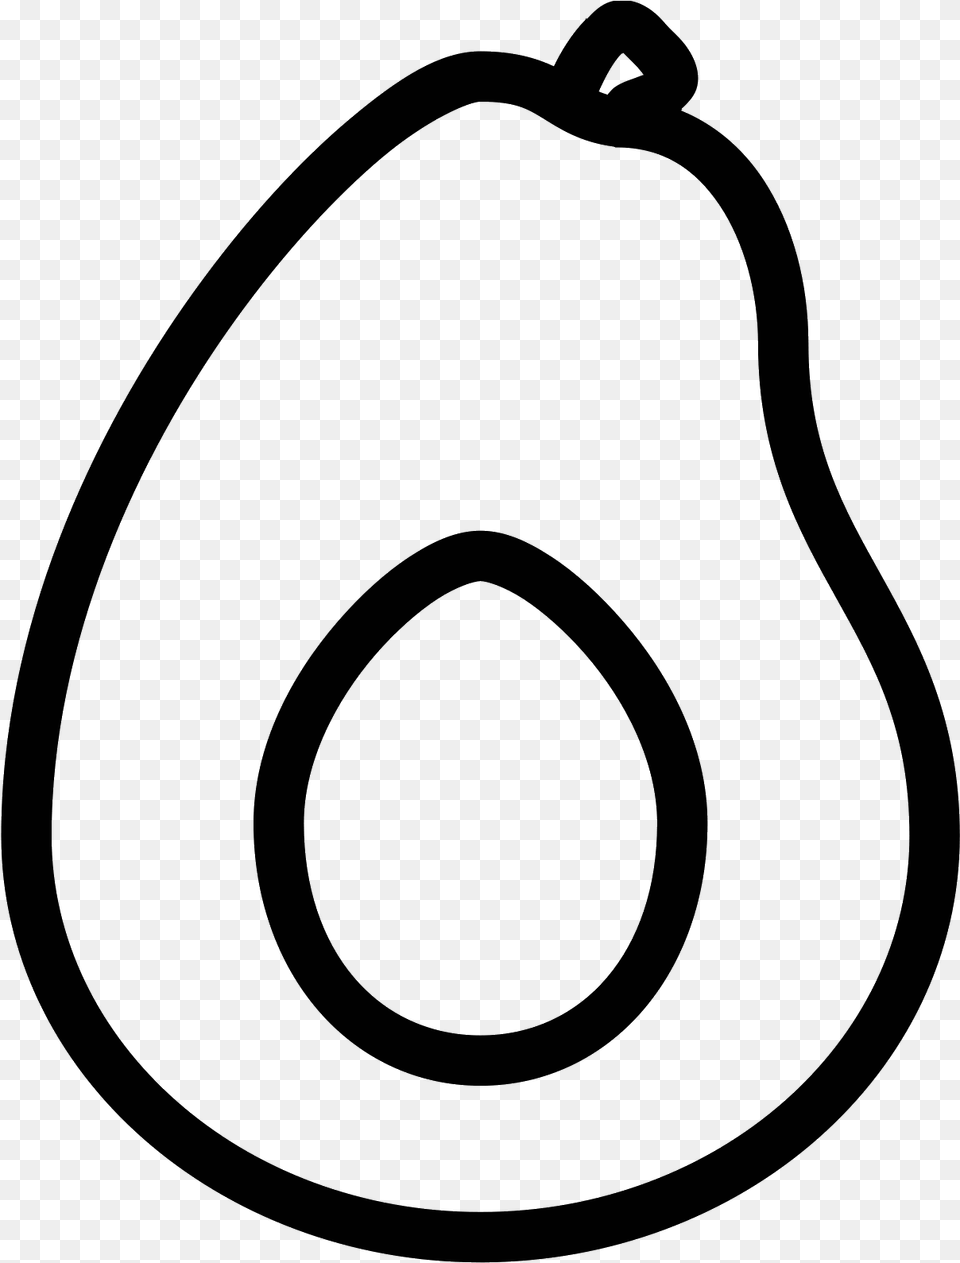 The Outline Of An Avocado That Has Been Cut In Clip Art, Gray Free Transparent Png